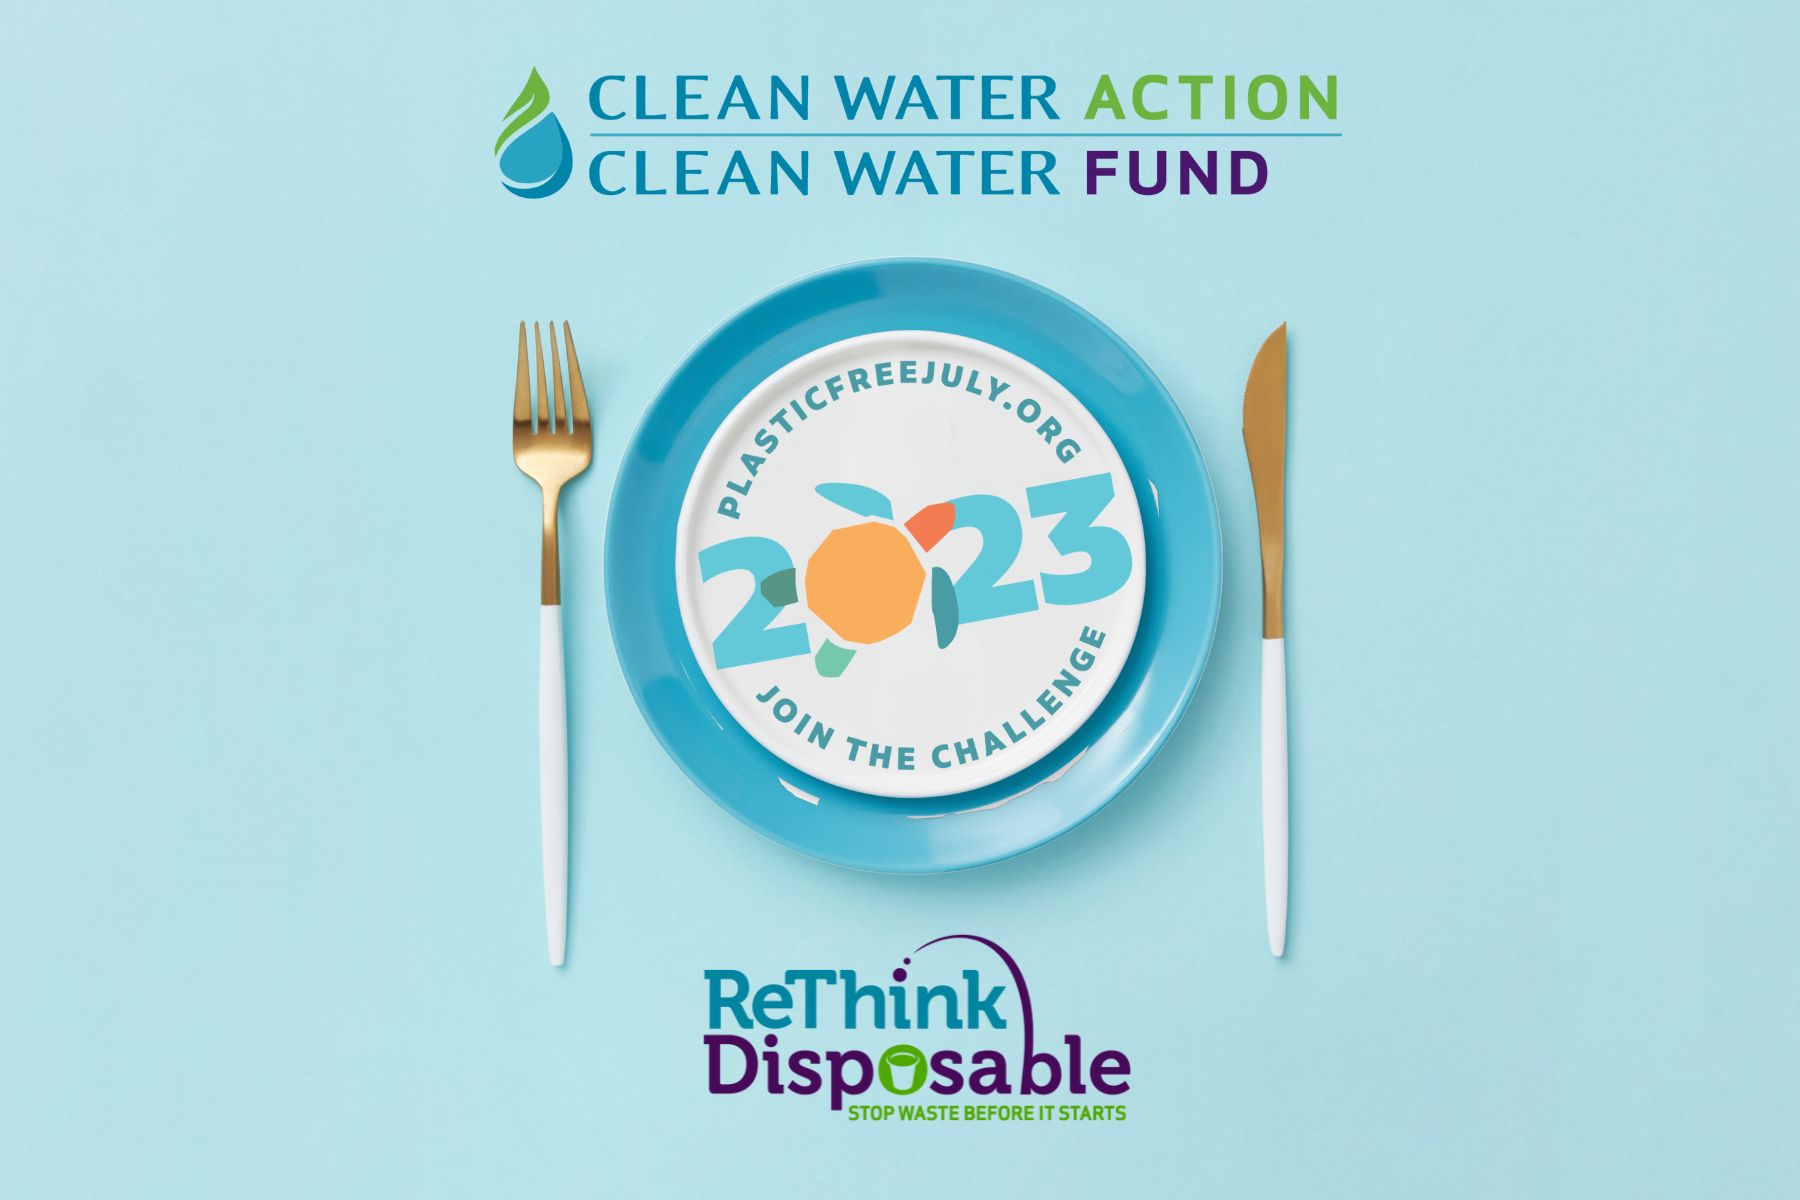 Image of reusable plate and silverware with Clean Water Action ReThink Disposable and Plastic Free July logos